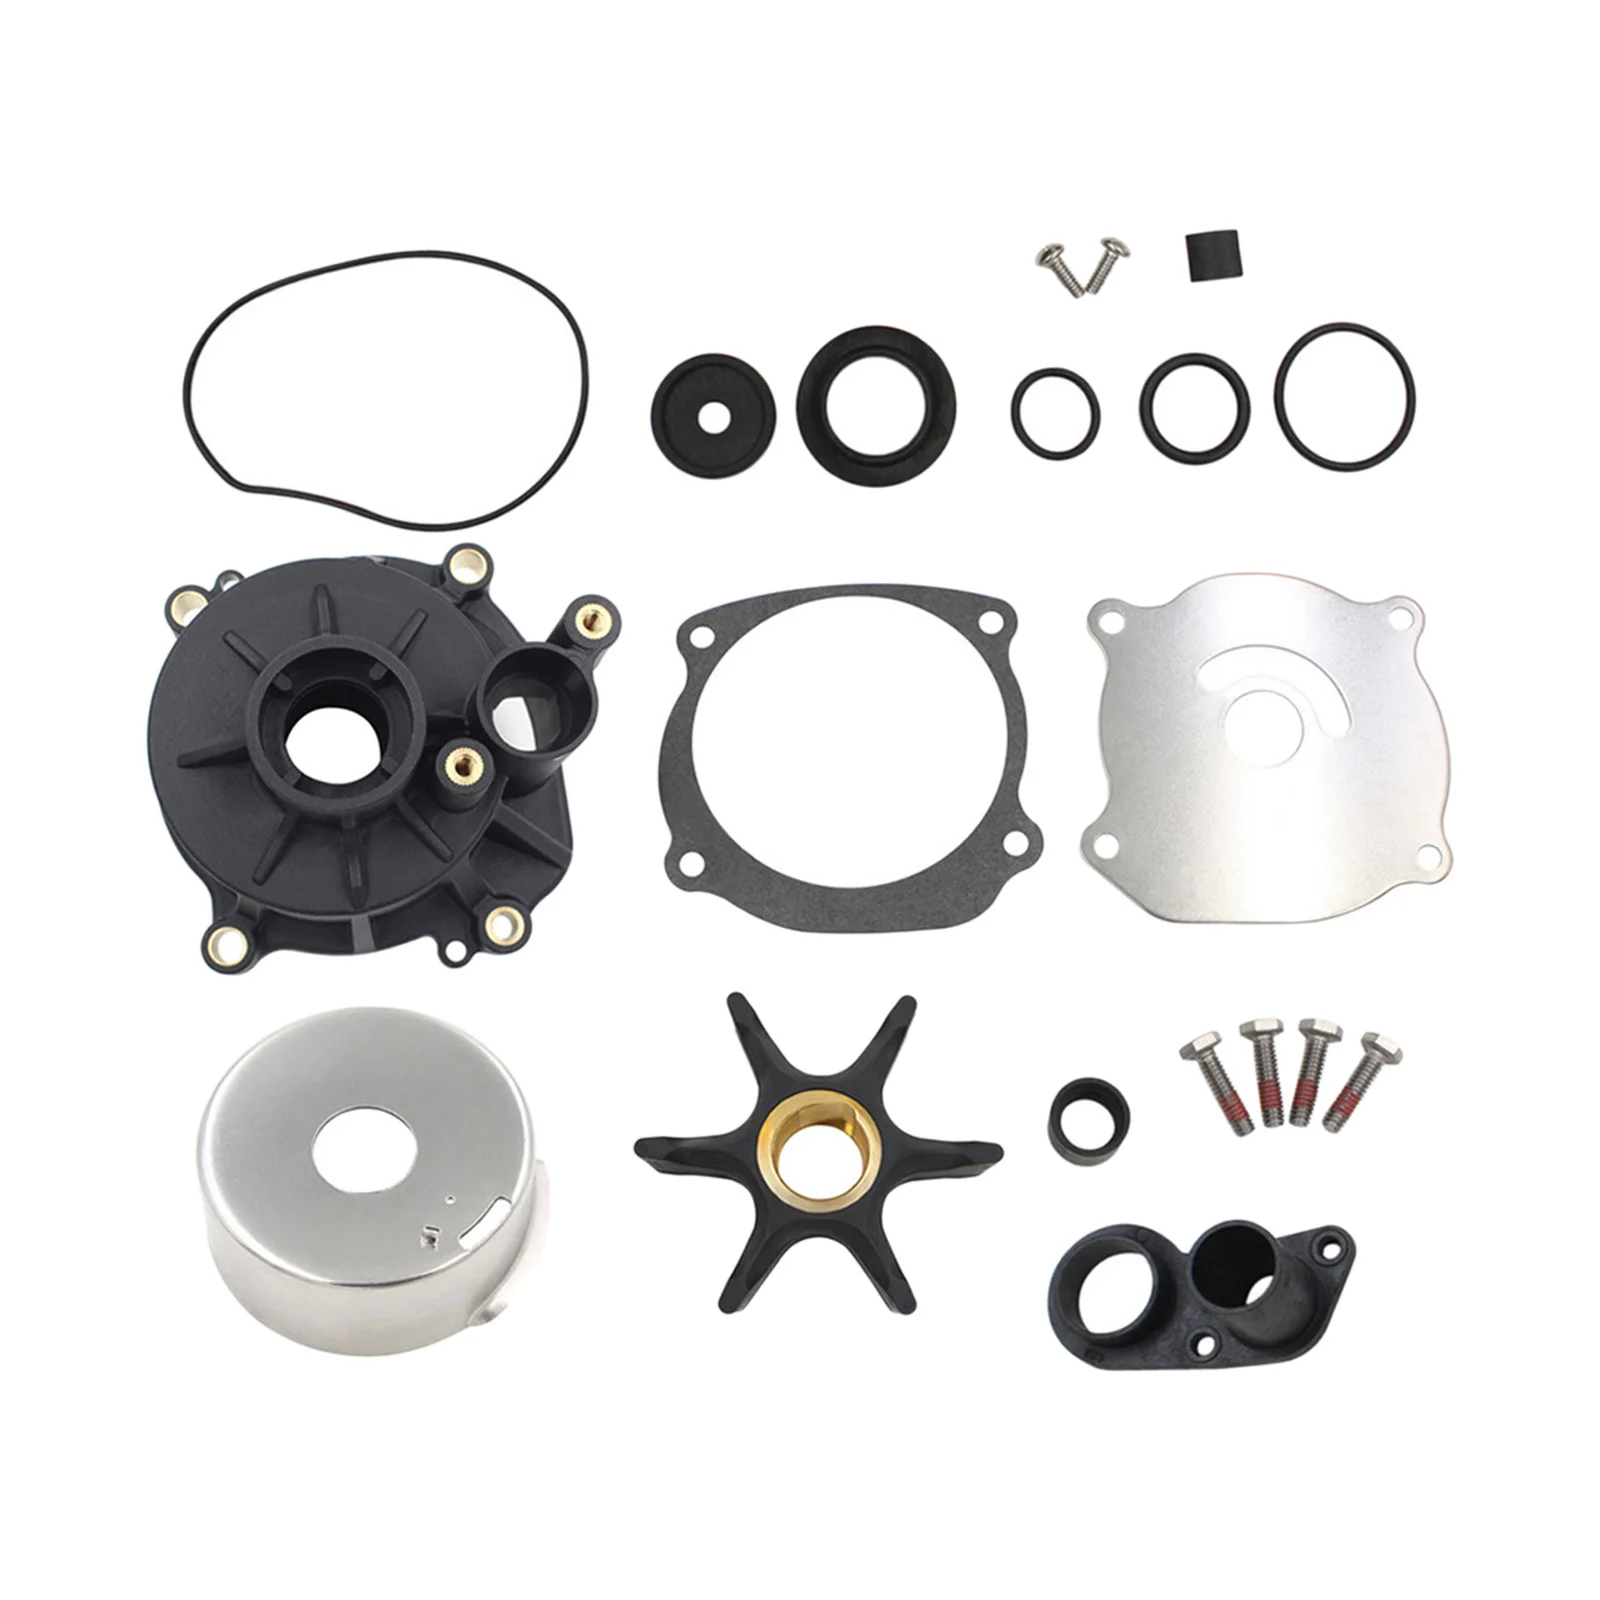 Water Pump Repair Set w/ Housing for Johnson Evinrude Outboard OMC 5001594